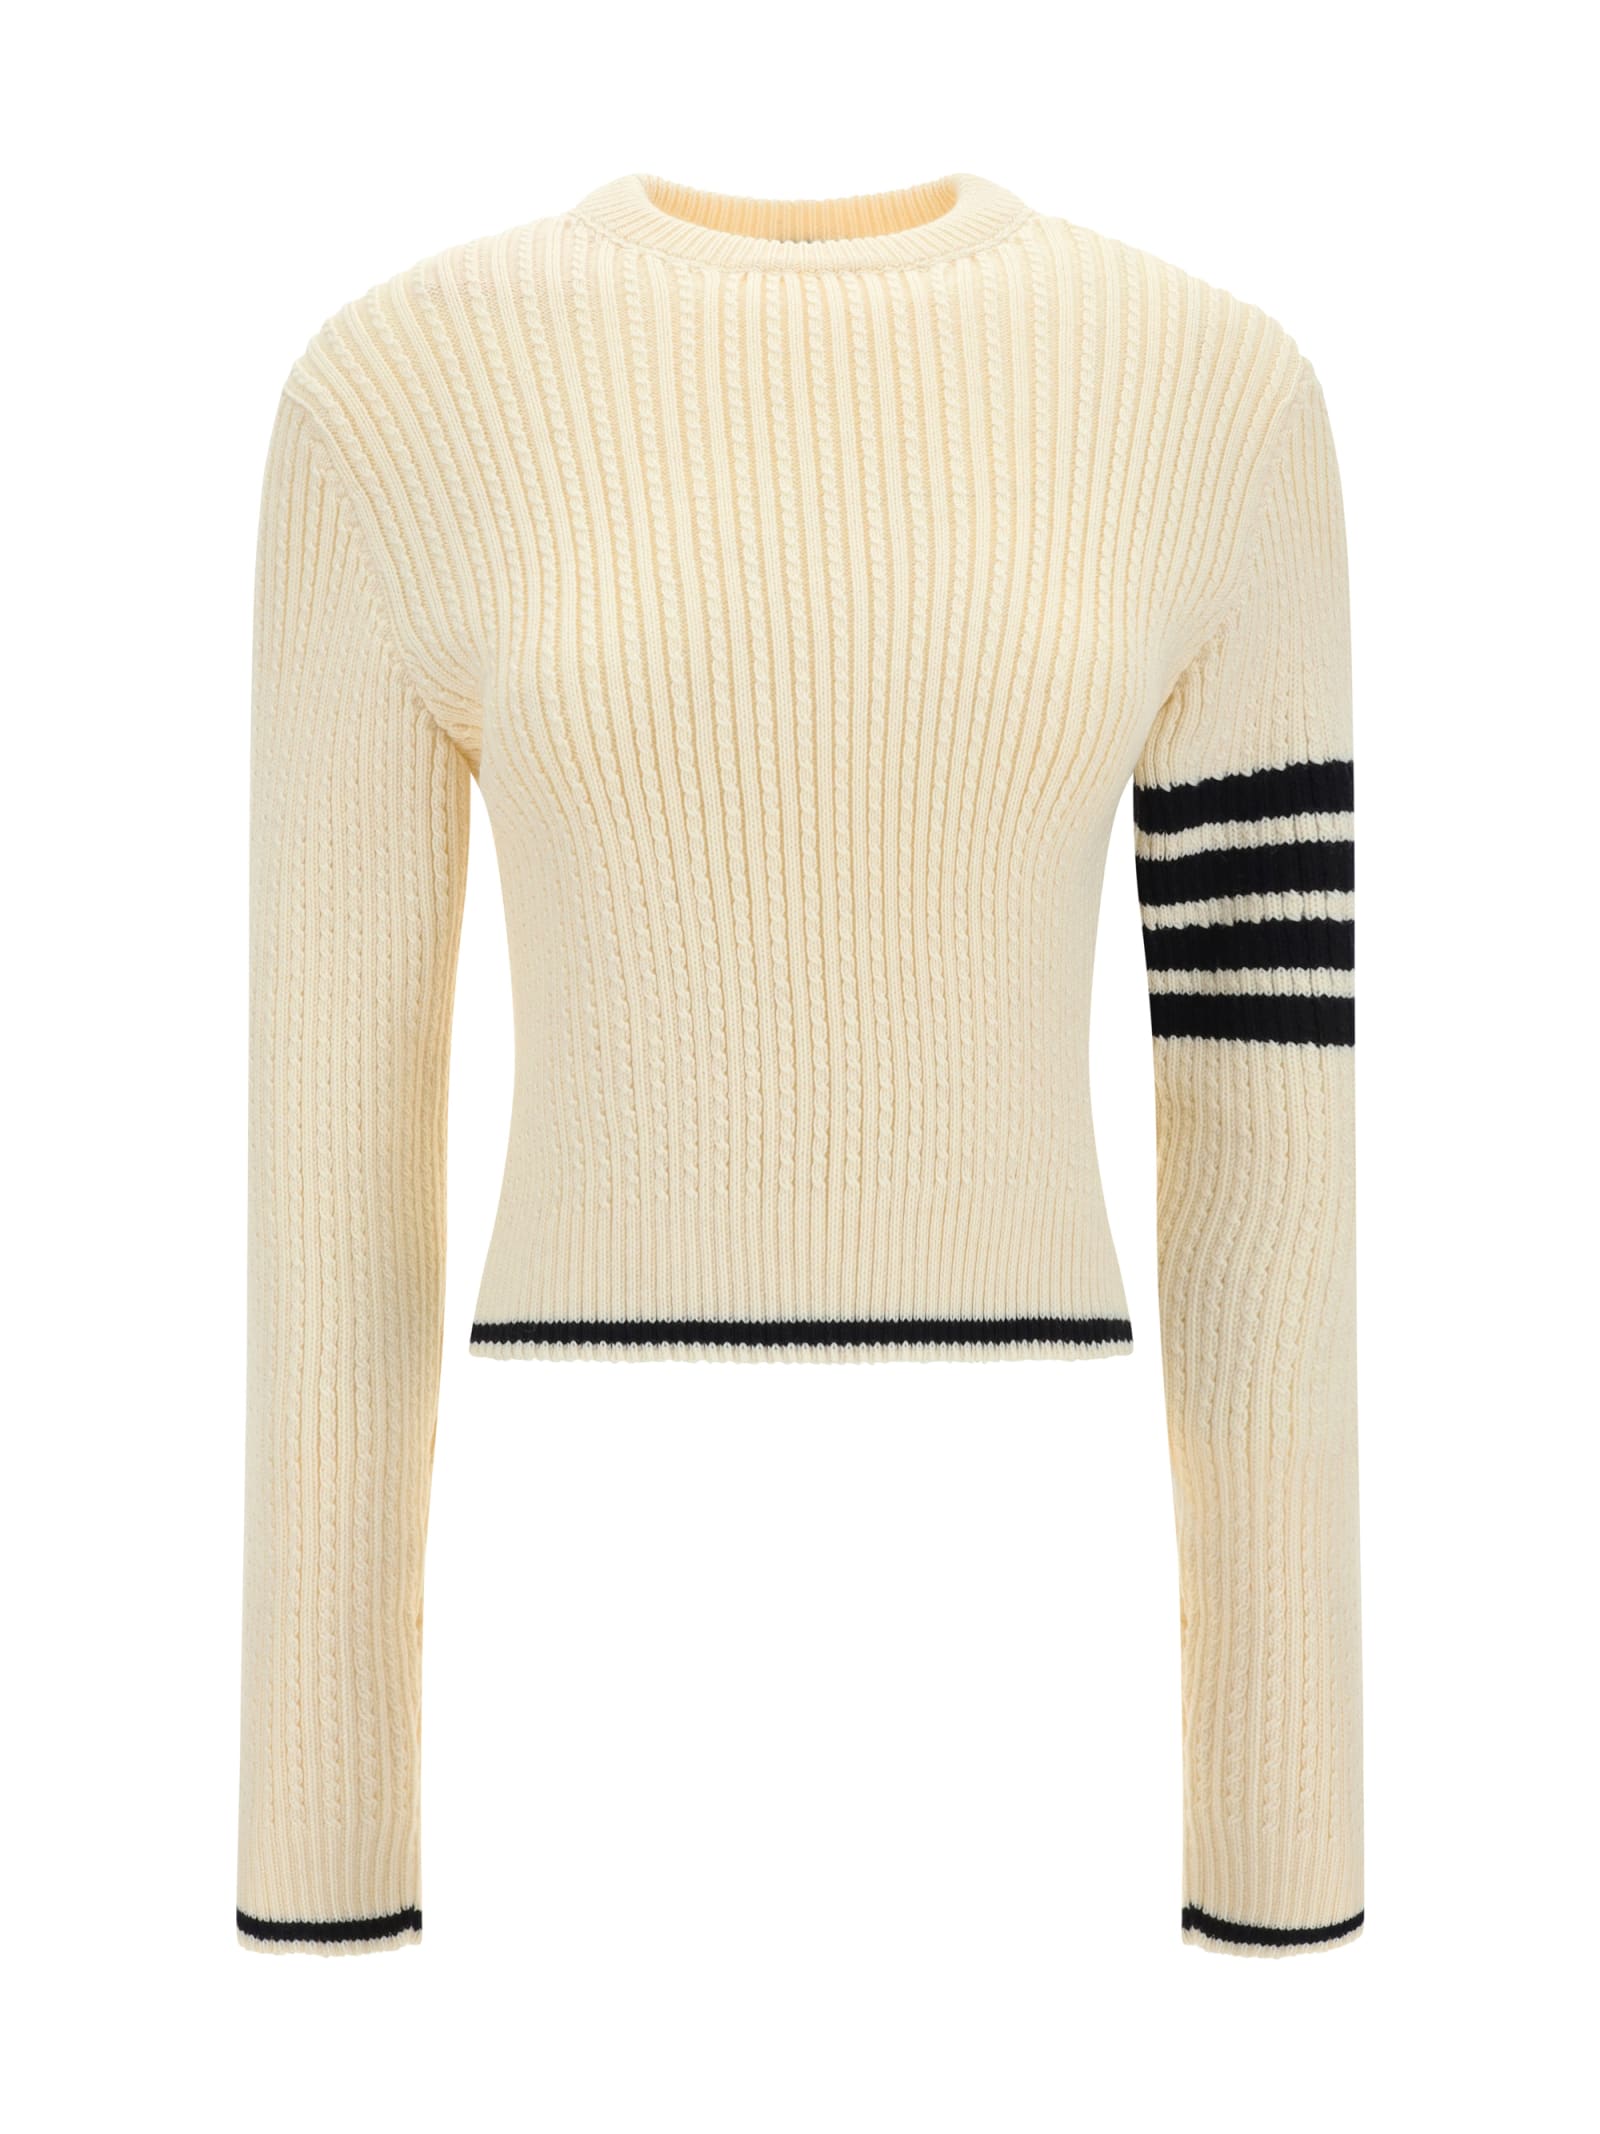 Shop Thom Browne Sweater In White